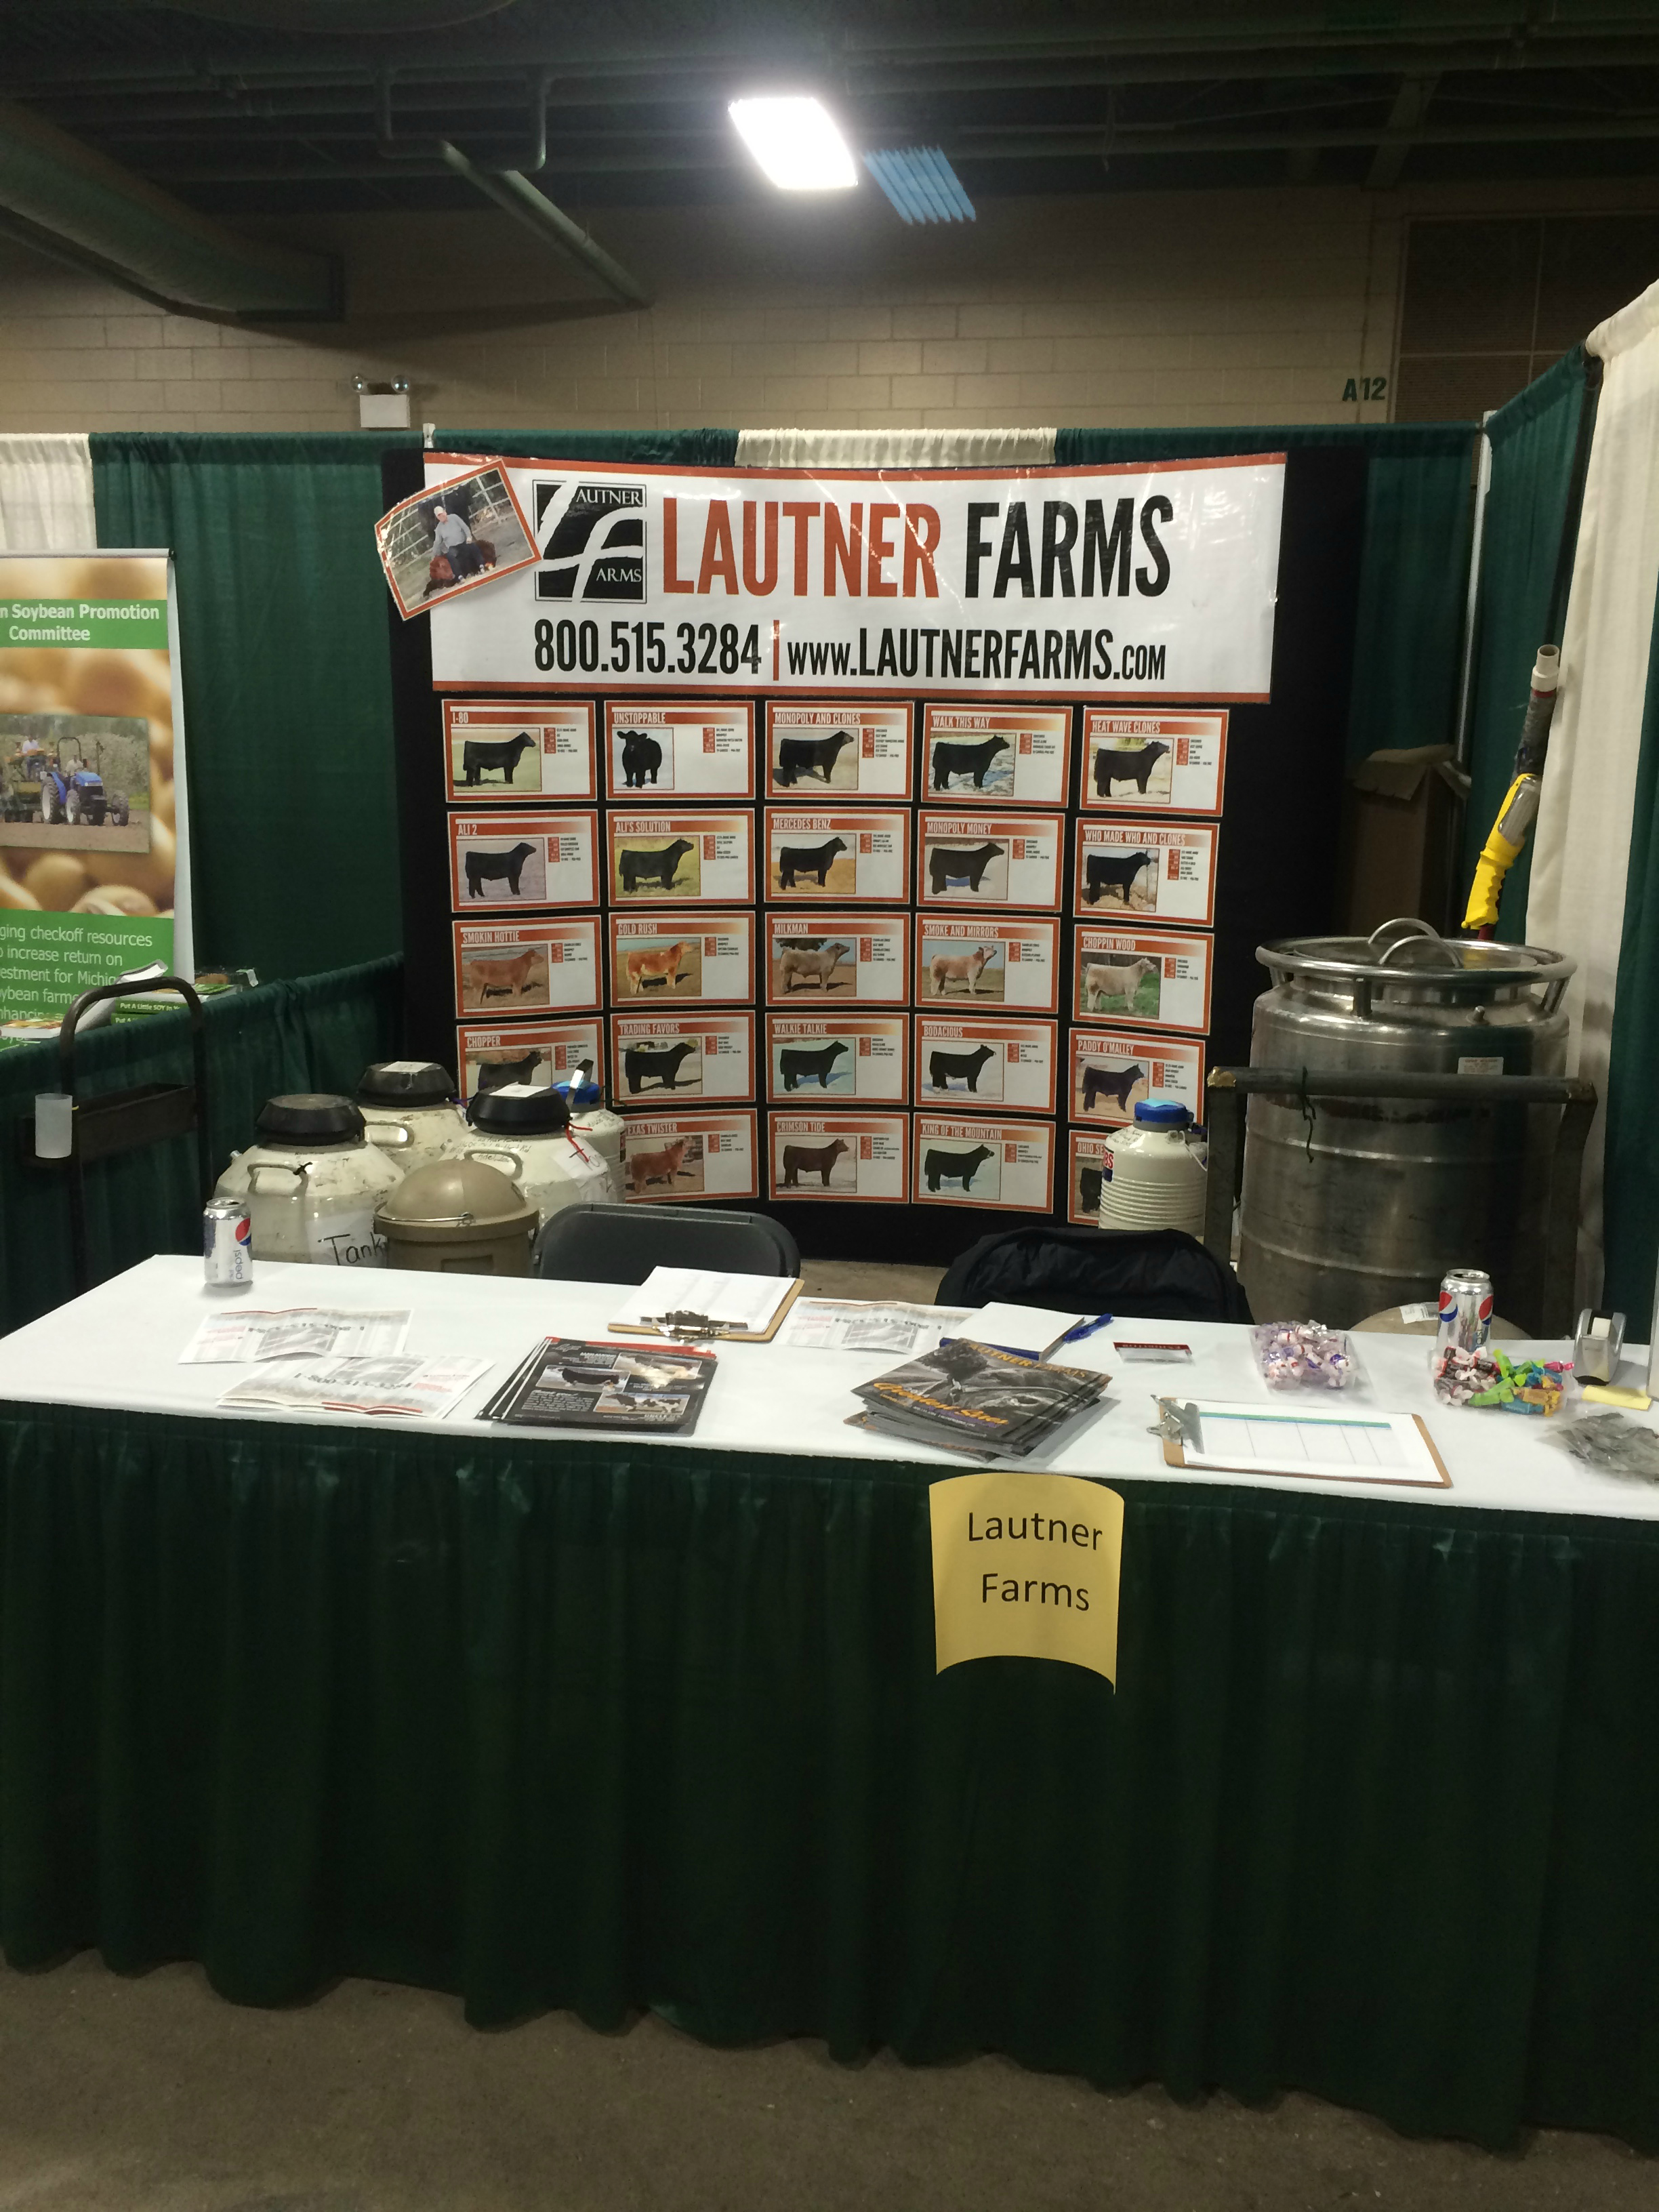 We are set up and ready to go here at the Michigan Beef Expo! Semen